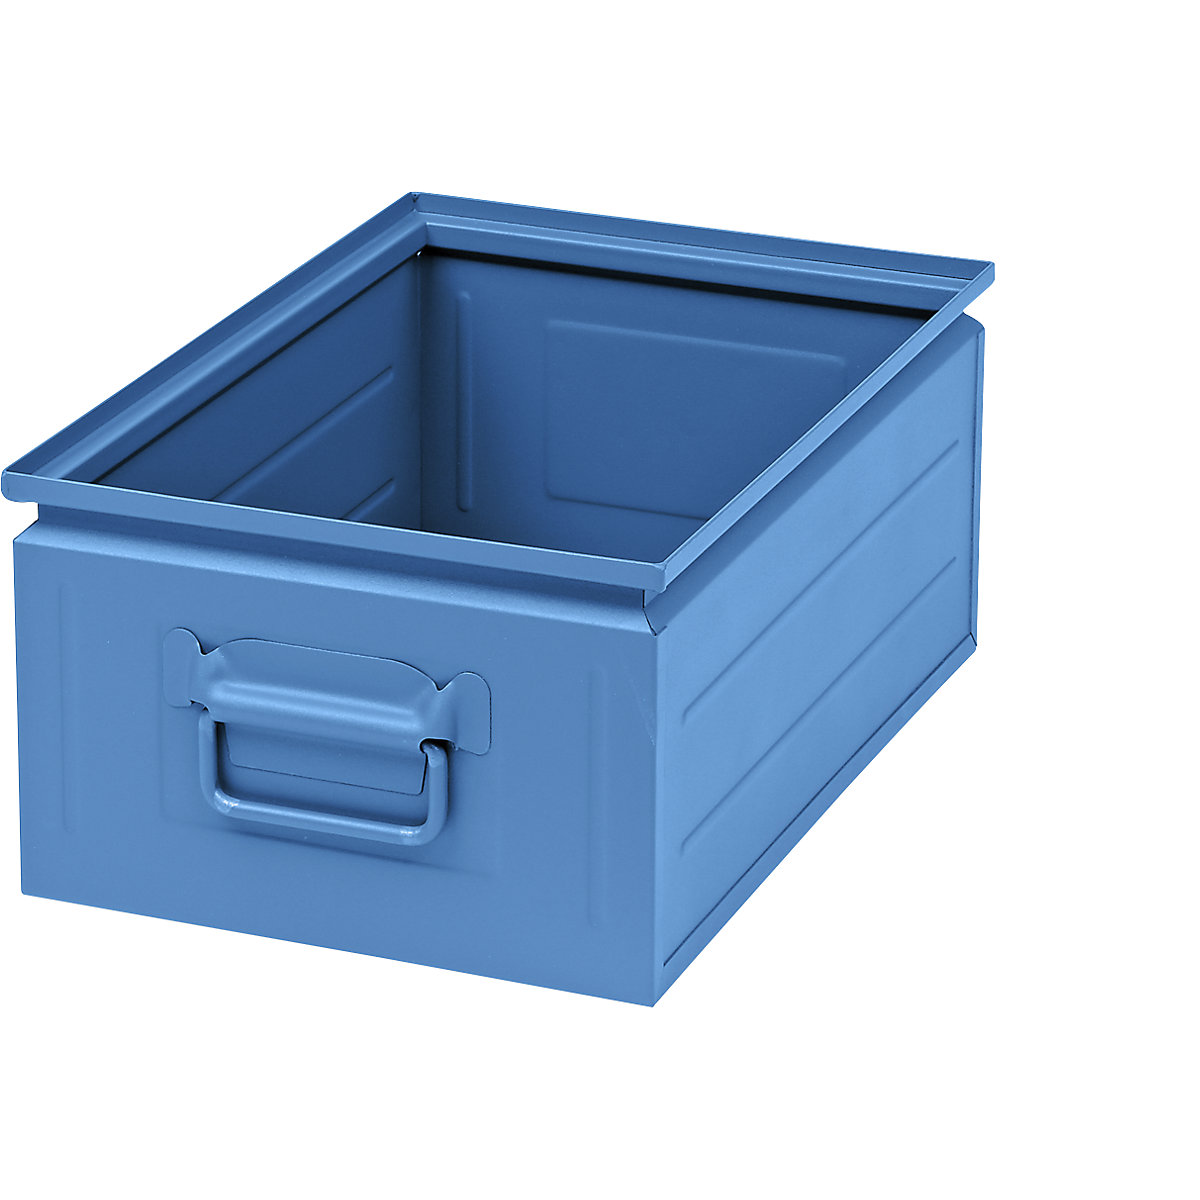 Stacking container made of sheet steel, capacity approx. 25 l, light blue RAL 5012-5